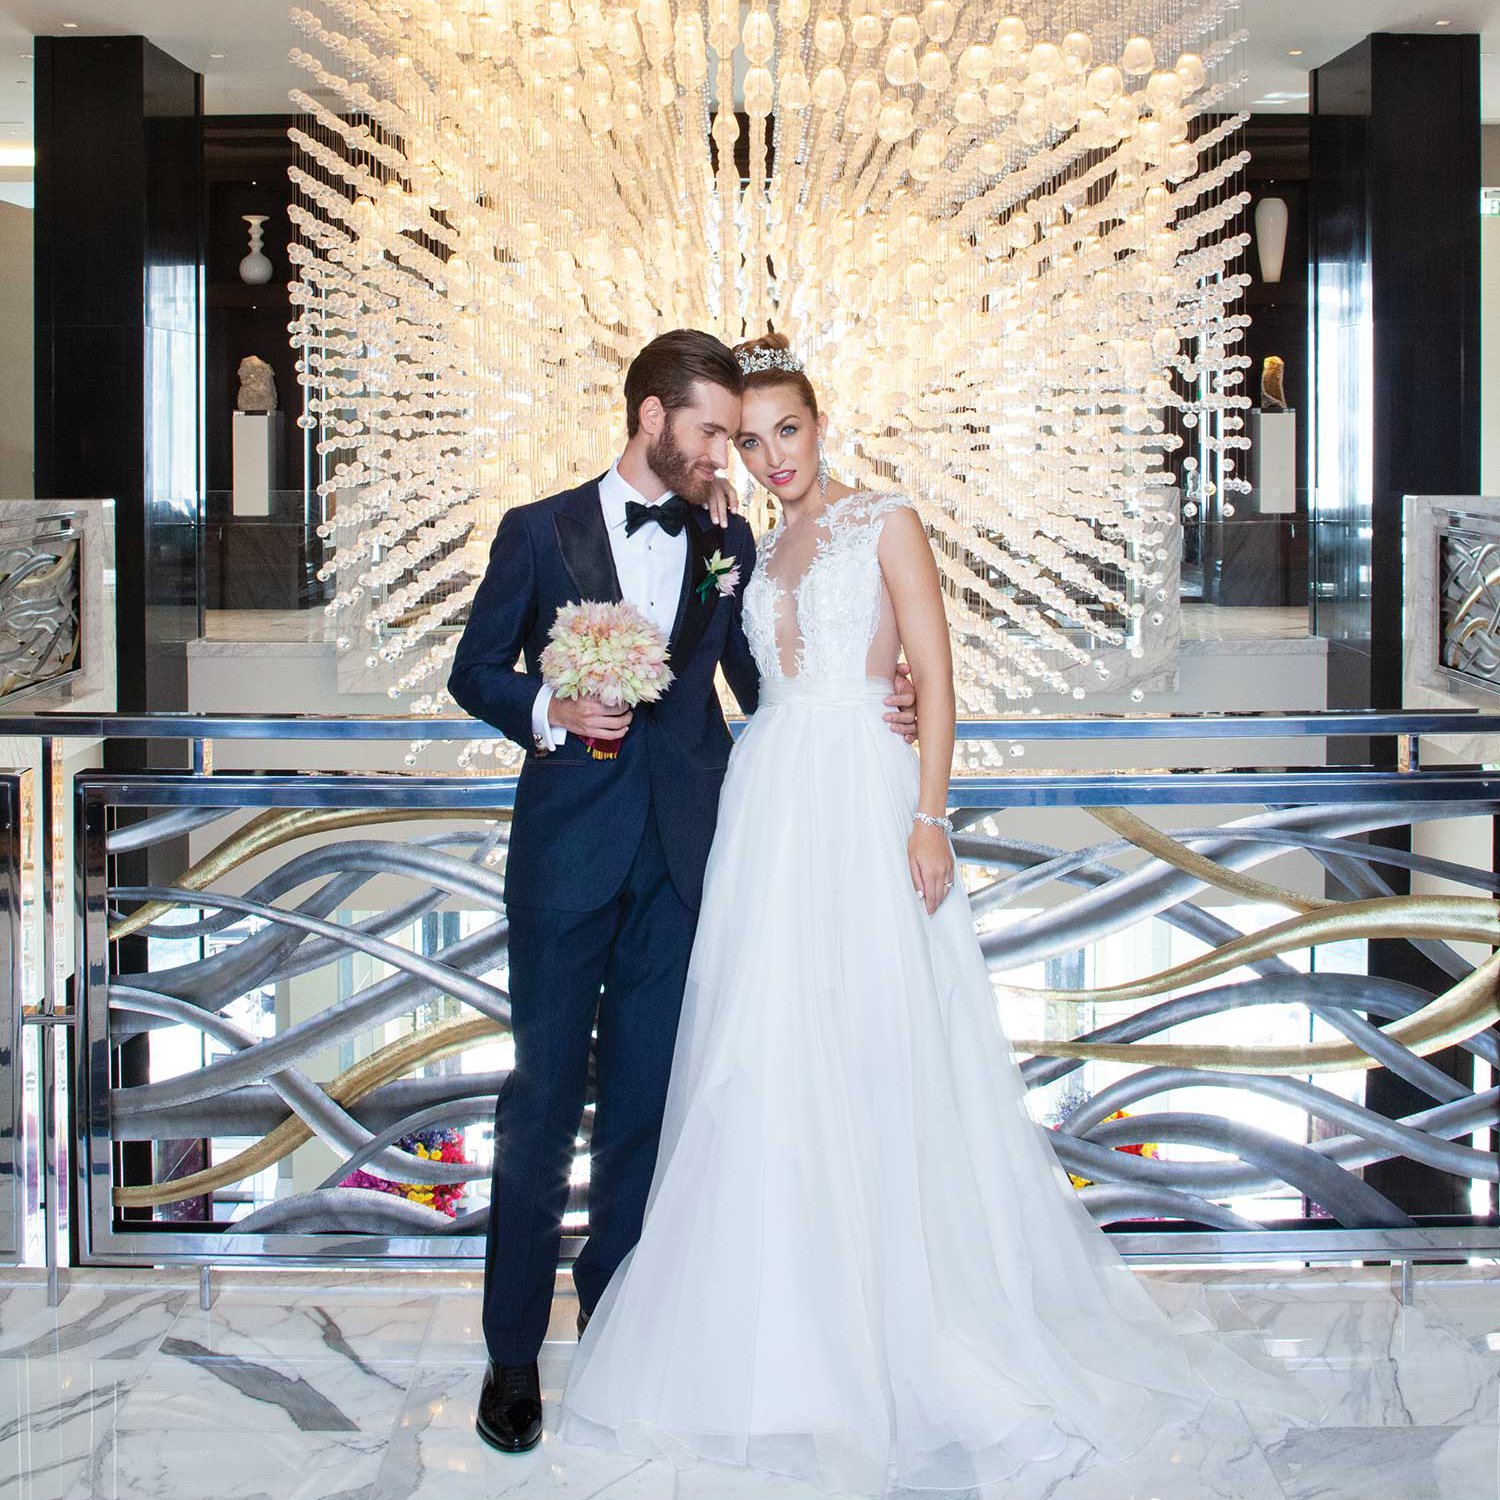 Modern upscale wedding at Houston's 5 Star Hotel wedding venue - The Post Oak Hotel at Uptown Park - featuring The Events Co.